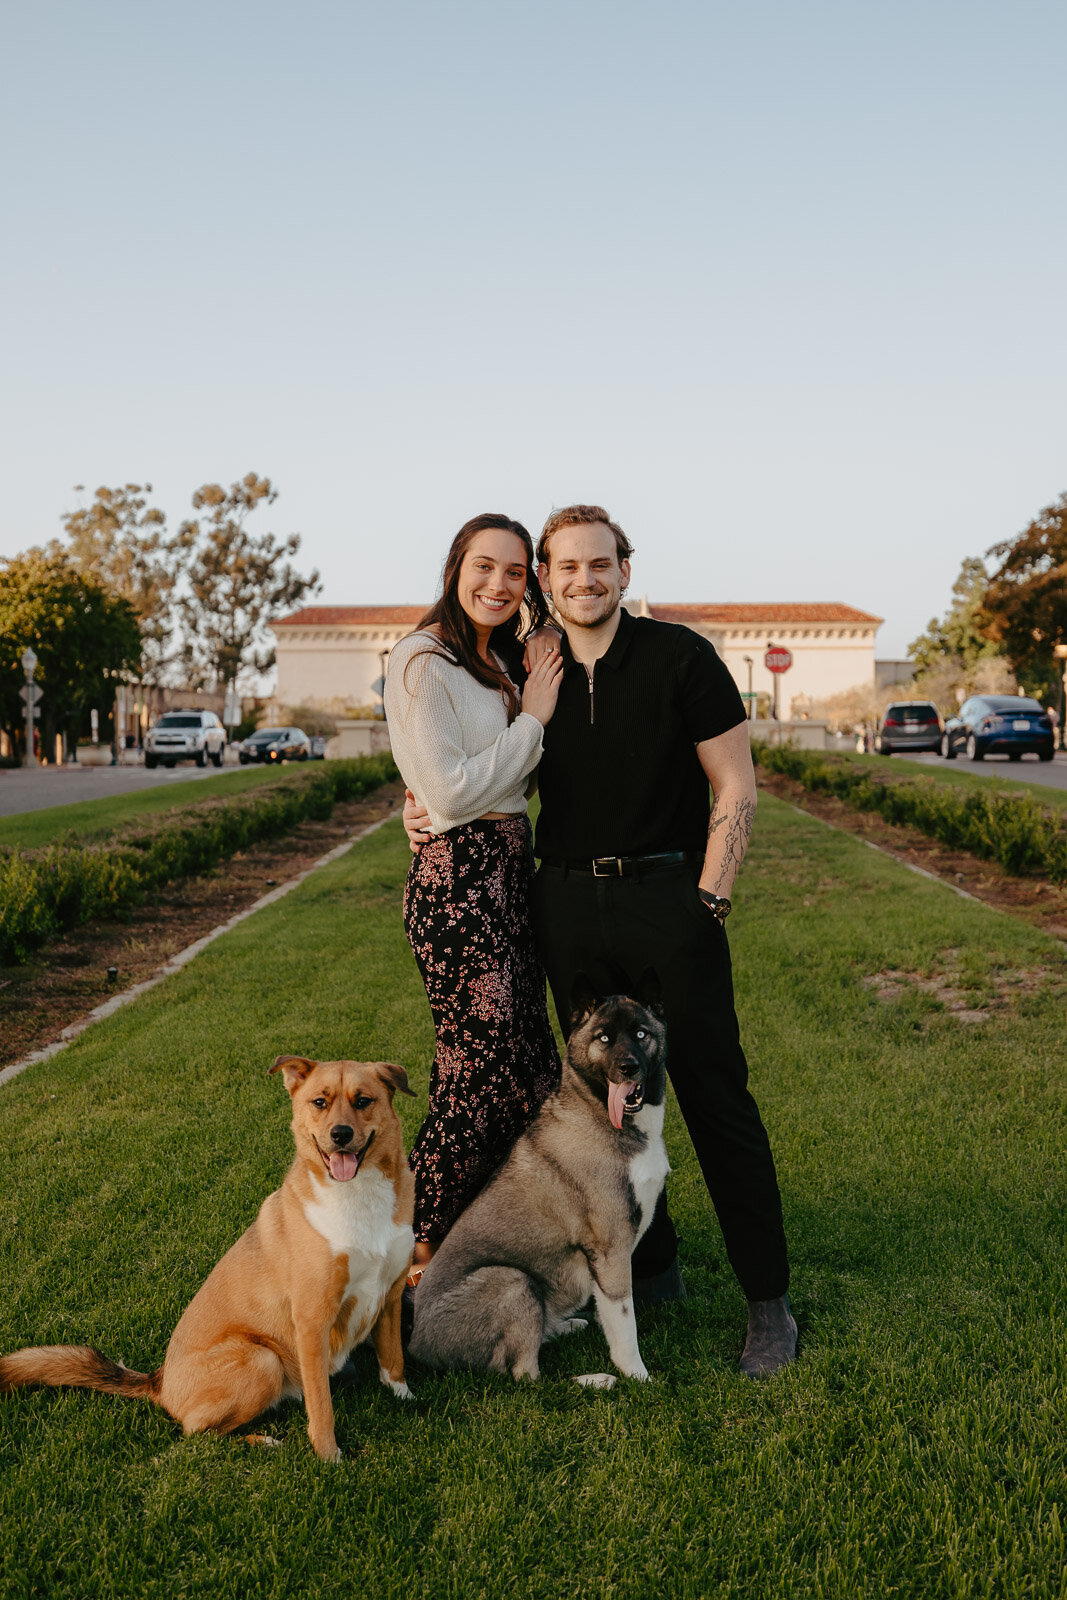 Lexx-Creative-Balboa-Park-With-Dogs-Engagement-2